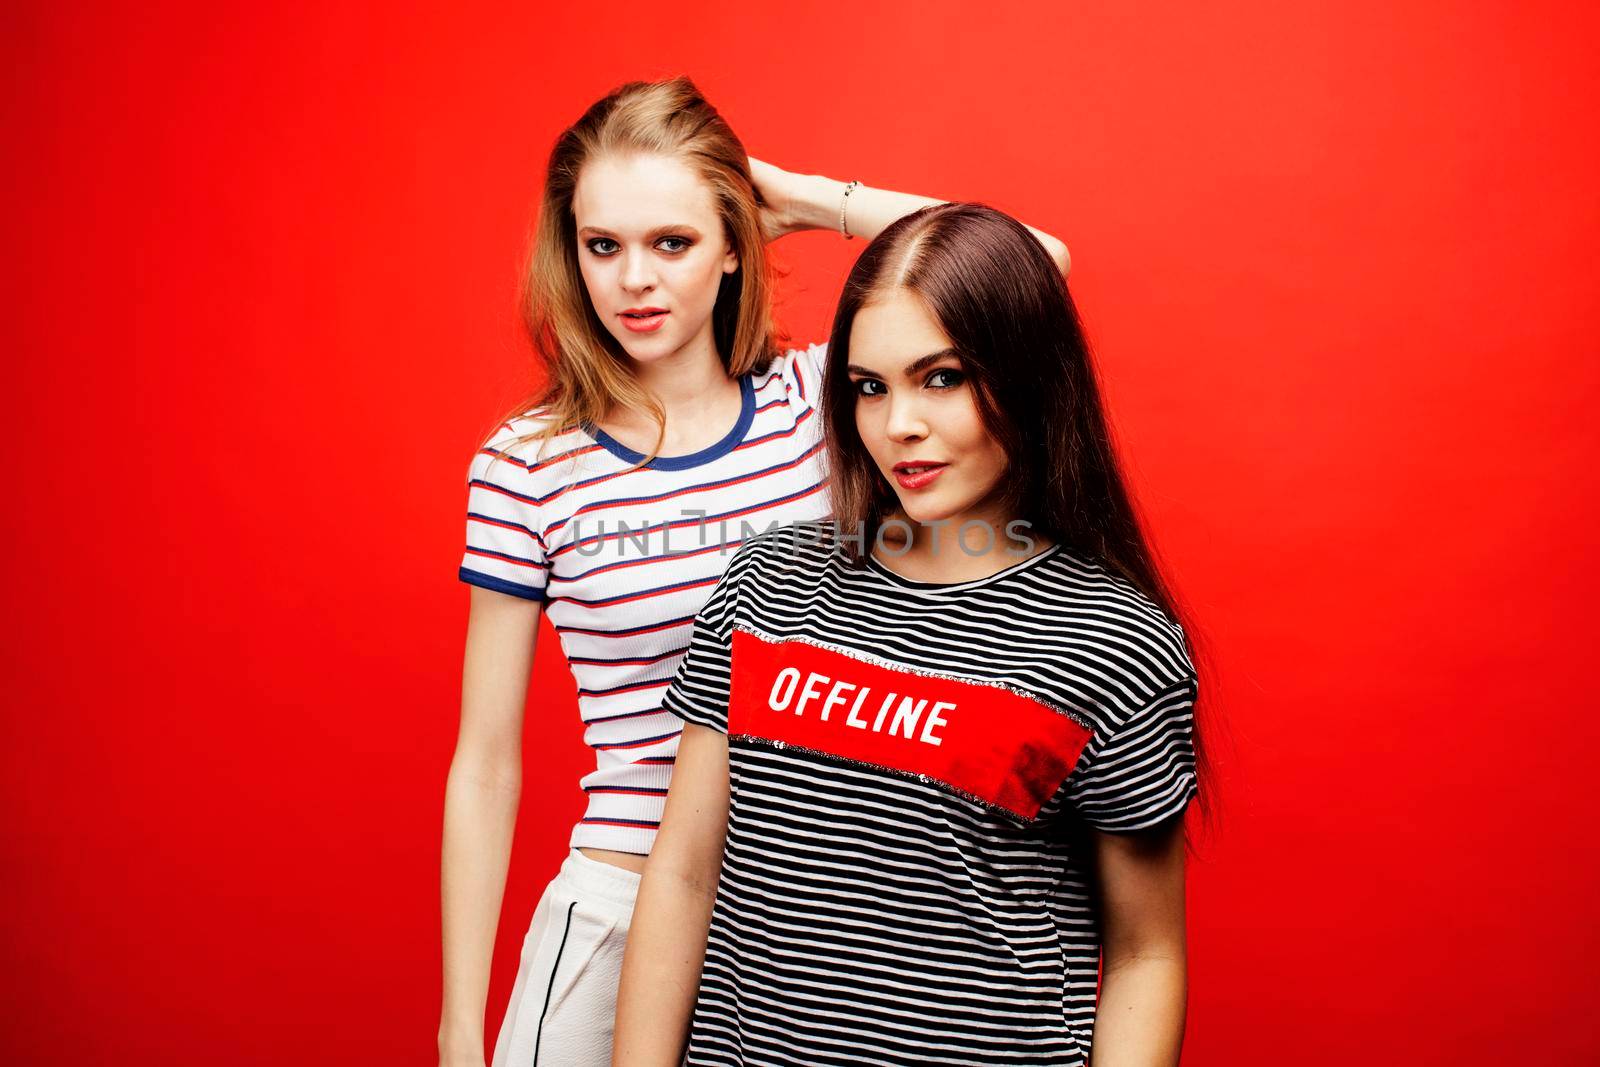 two best friends teenage girls together having fun, posing emotional on red background, besties happy smiling, lifestyle people concept by JordanJ